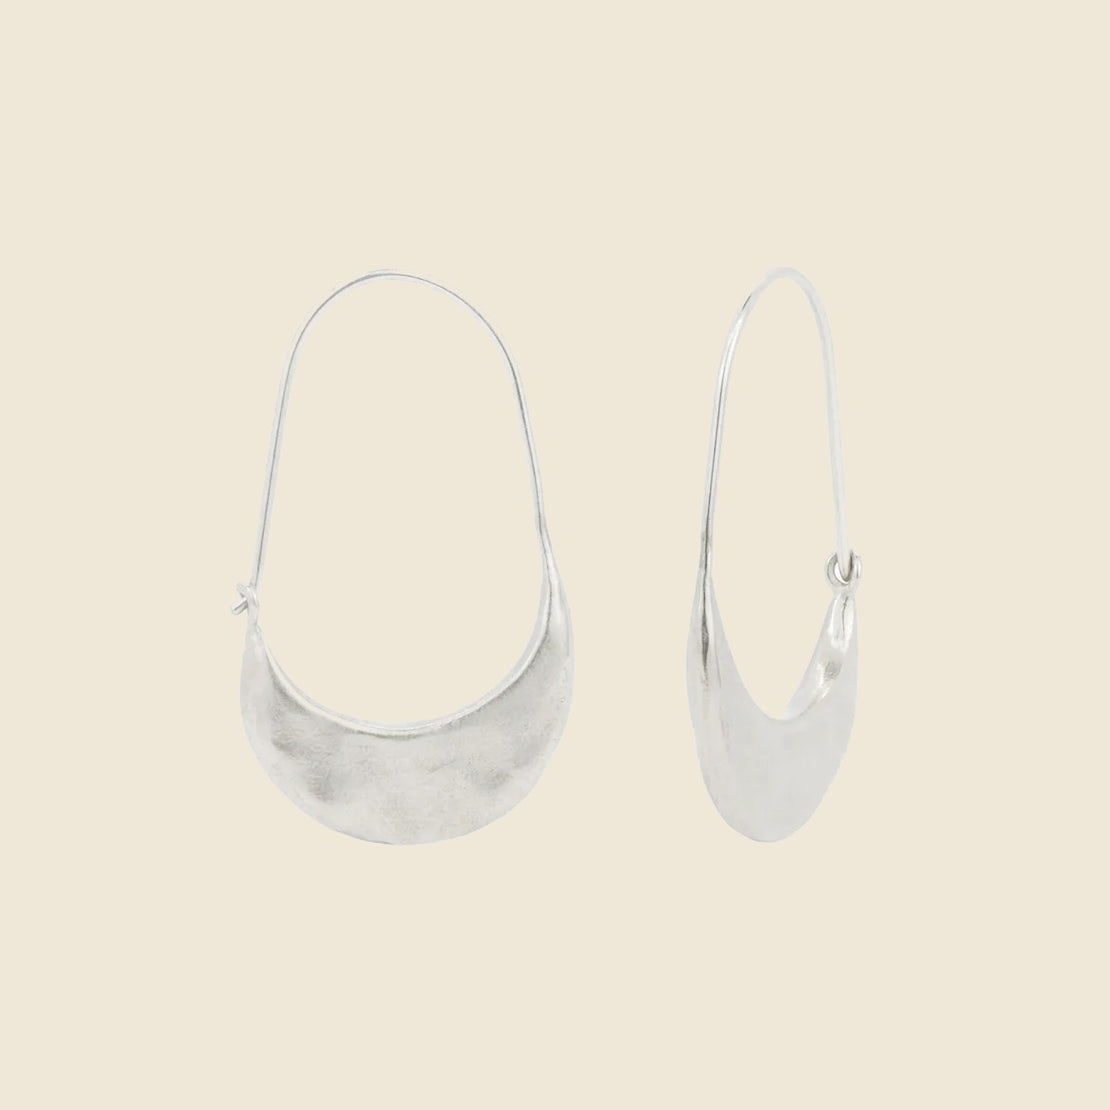 Muse Hoops - Silver - Amanda Hunt - STAG Provisions - W - Accessories - Earrings